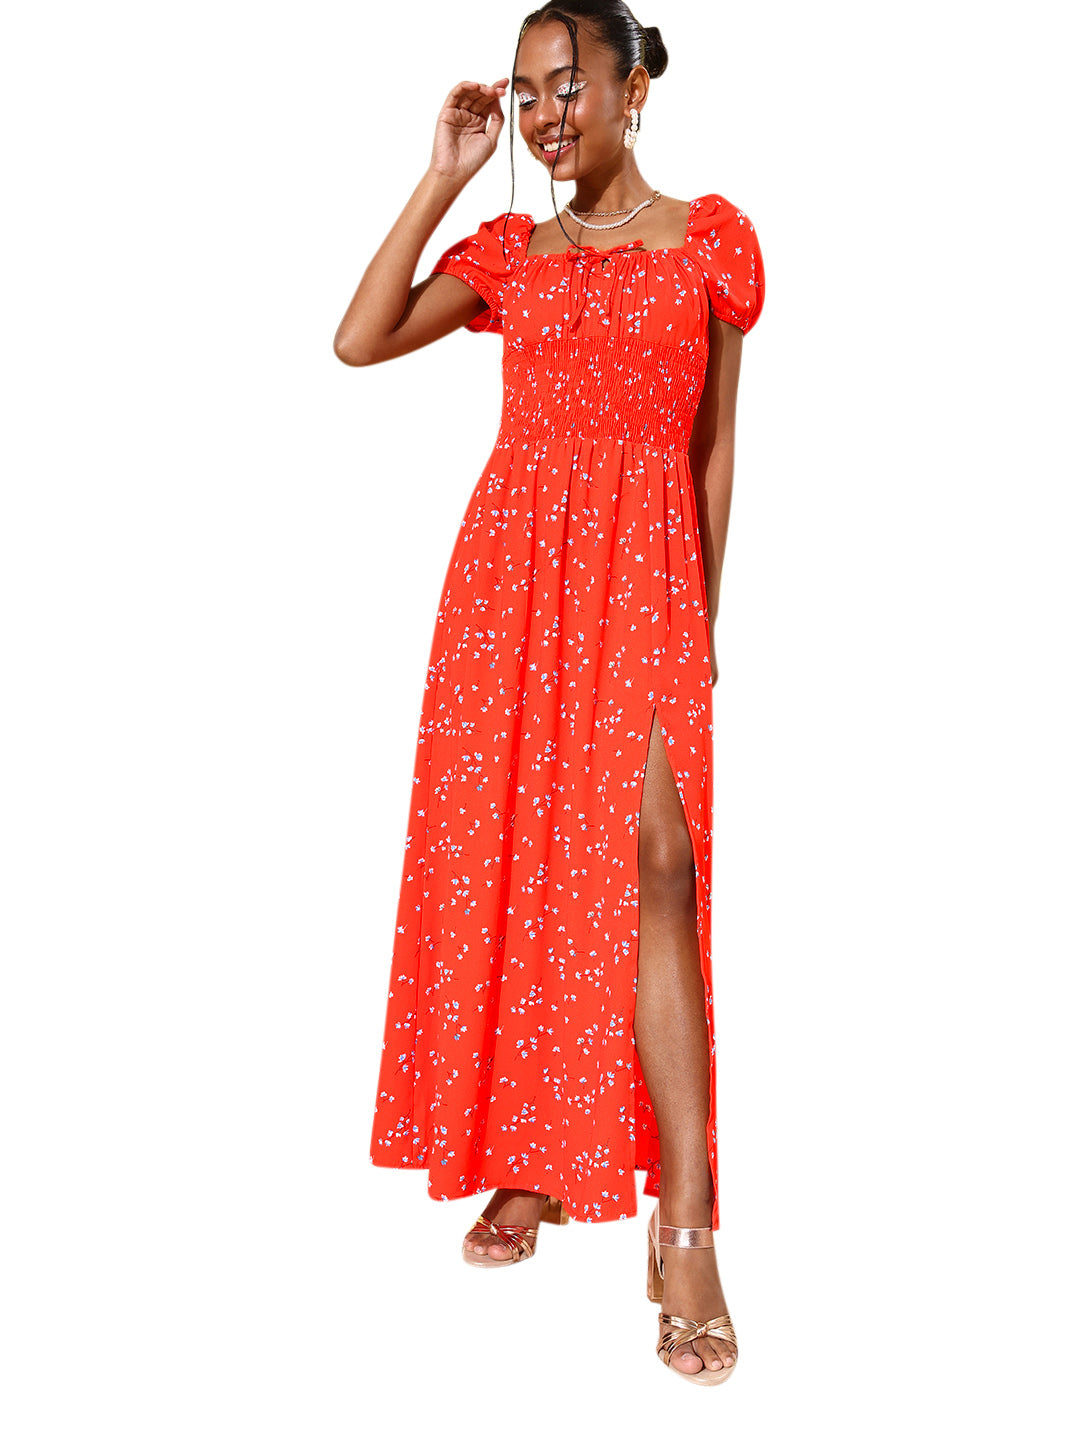 Women's Coral Floral Maxi Dress with Puffed Sleeve - StyleStone